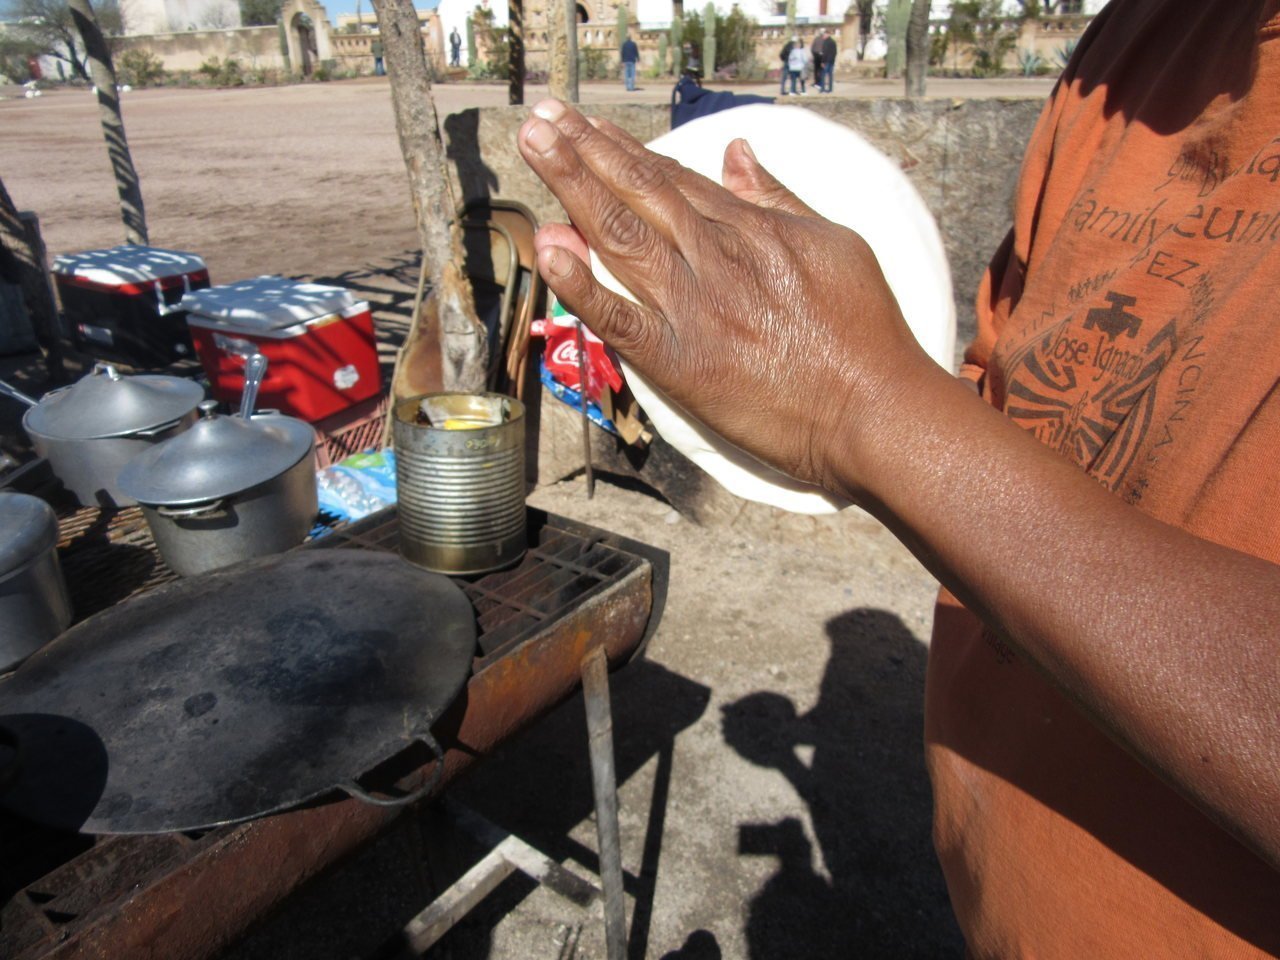 Indian frying bread being made at Mission San Xavier del Bac, Tucson Arizona